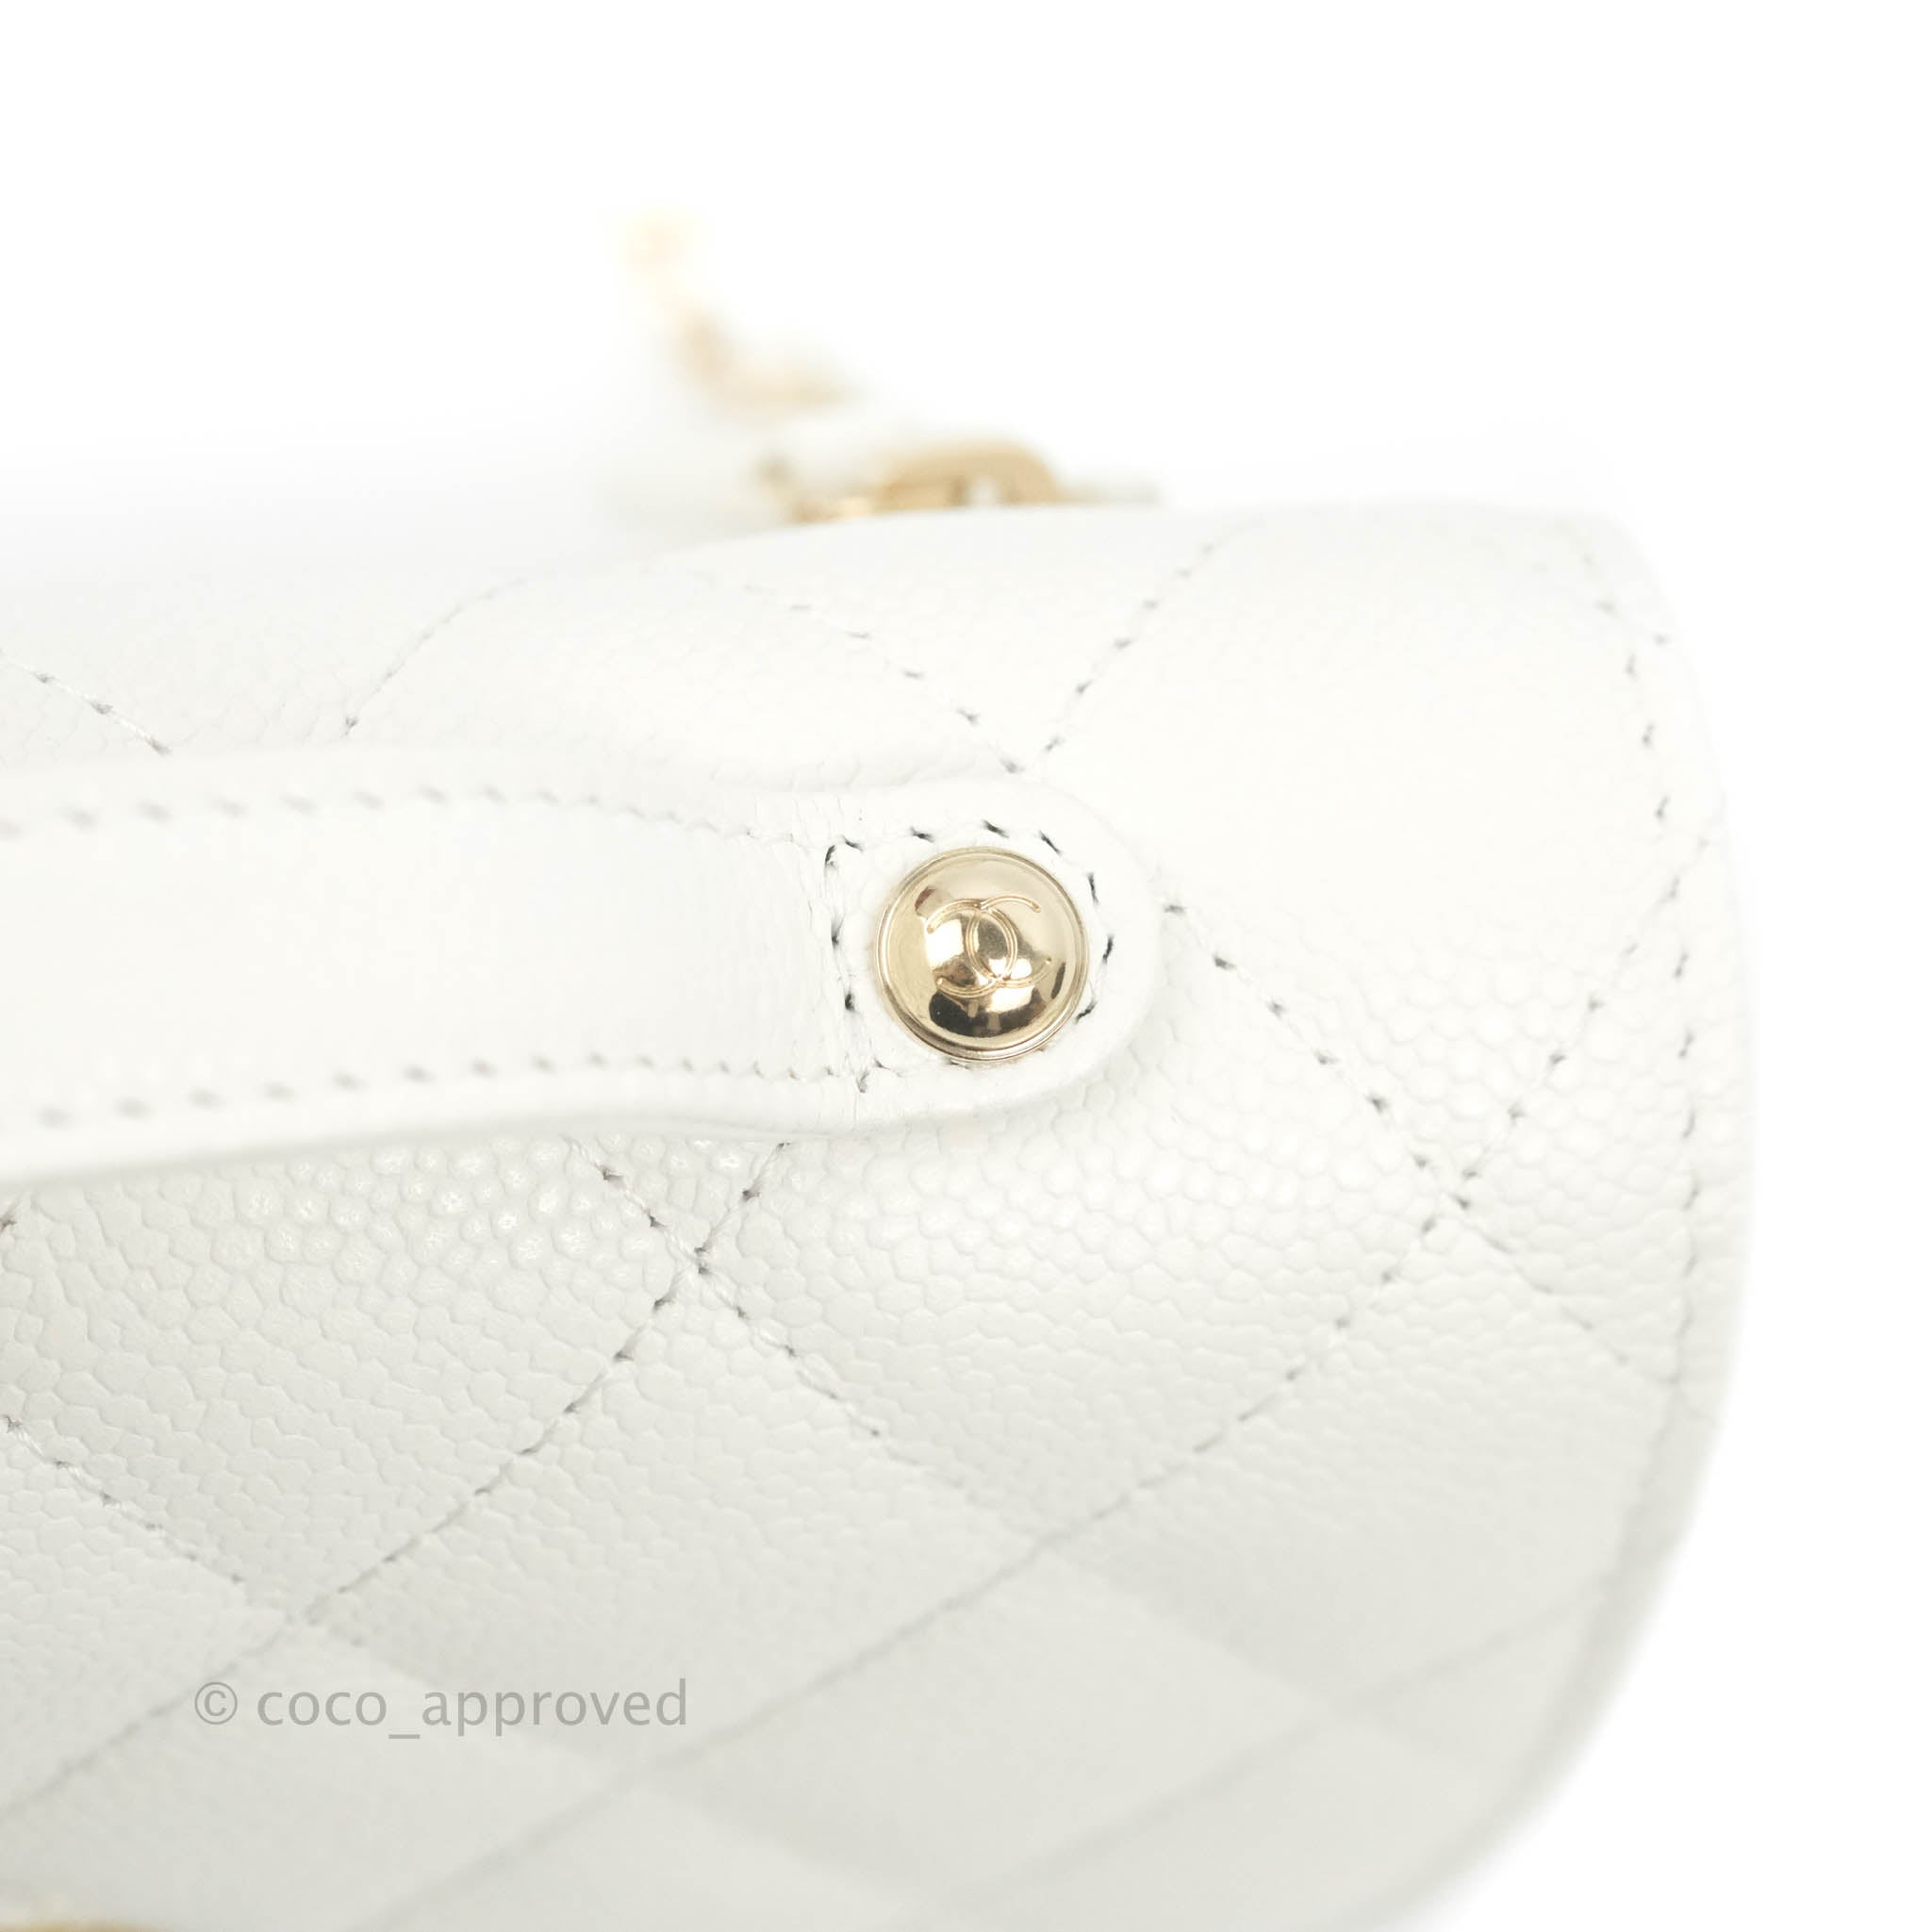 Chanel Business Affinity Clutch with Chain, Yellow Caviar with Gold  Hardware, New in Box WA001